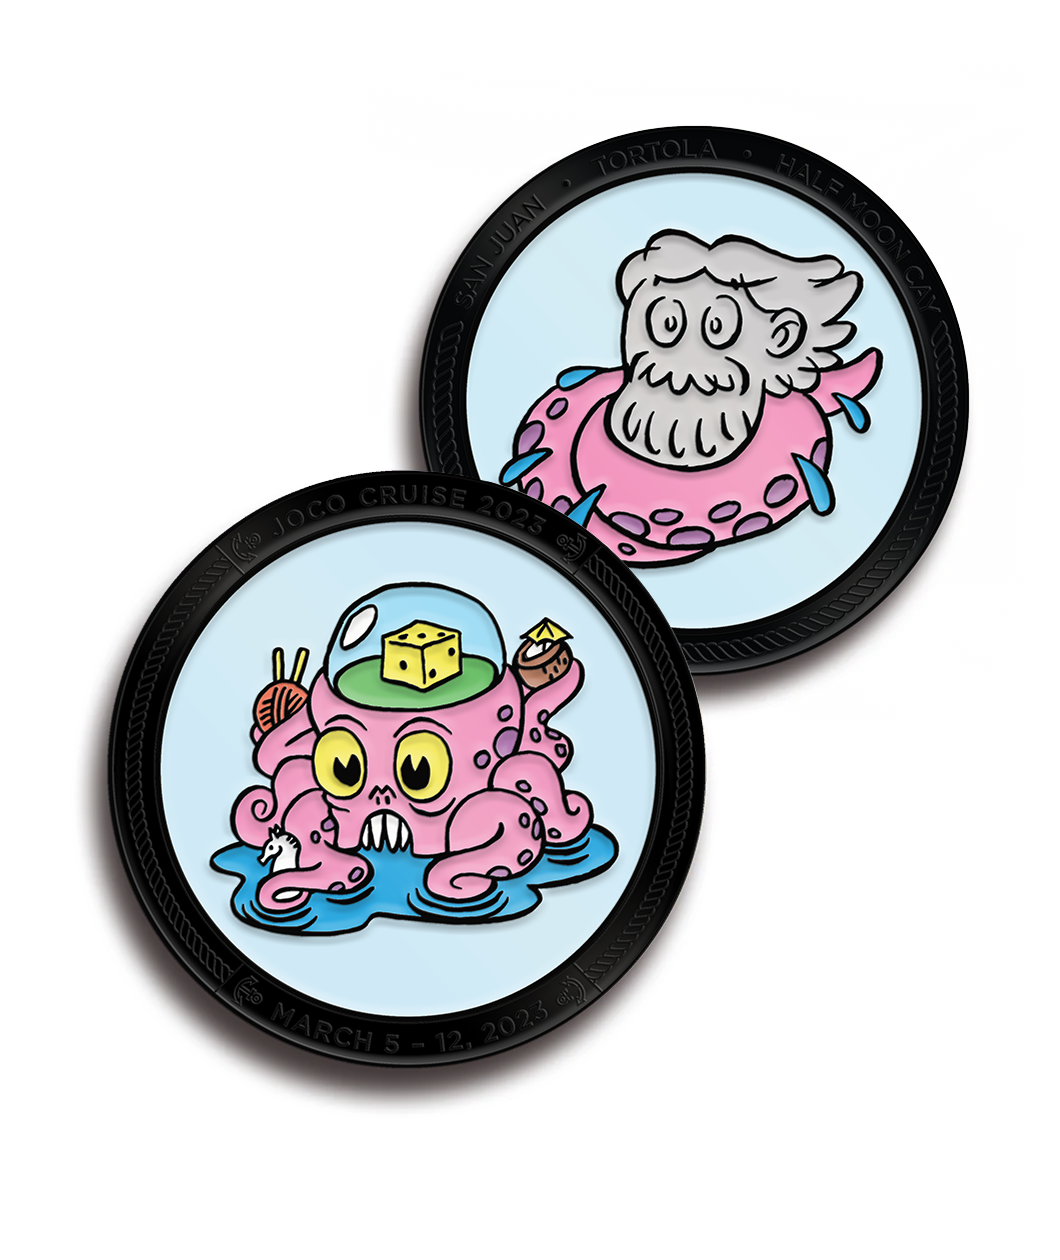 The 2023 Joco Cruise coin is double sided. A pink and purple kraken holding various objects such as a coconut, ball of yarn and seahorse with a die in a dome on its head is on one side . The other side shows a tentacle wrapping around a bearded mans head. 